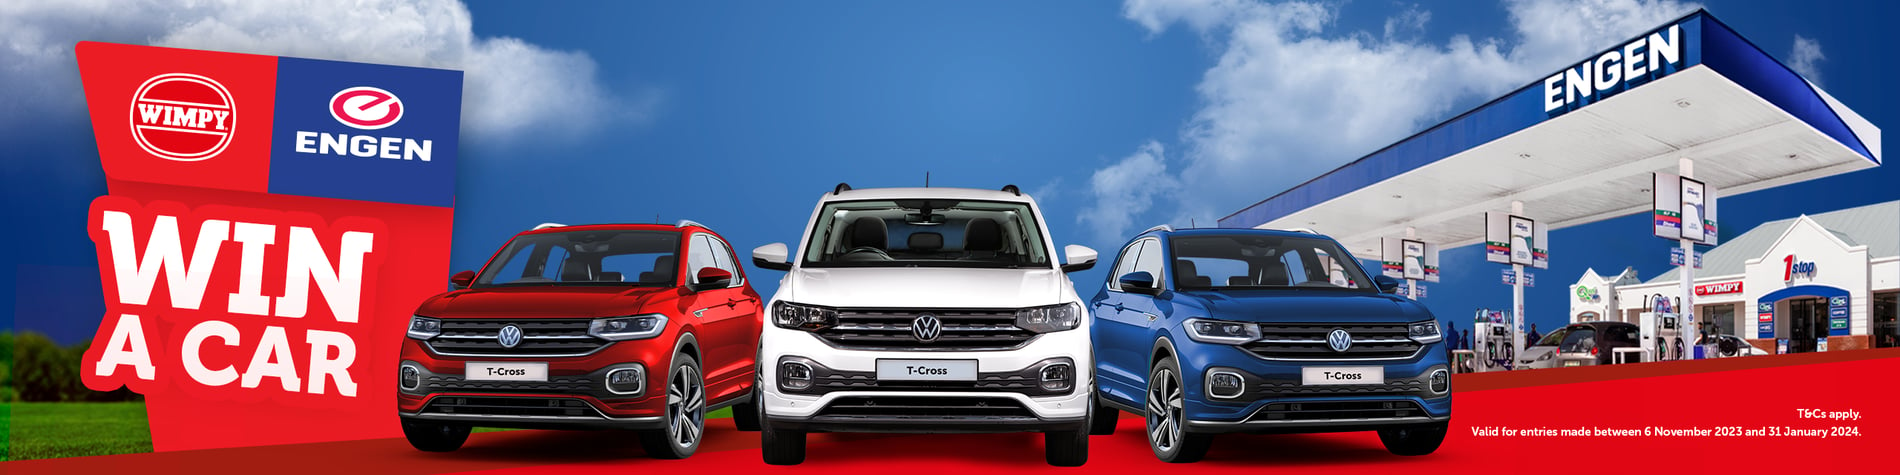 Win a car at Wimpy at Engen. 3 VW T-Cross cars and a Wimpy at Engen in the background.